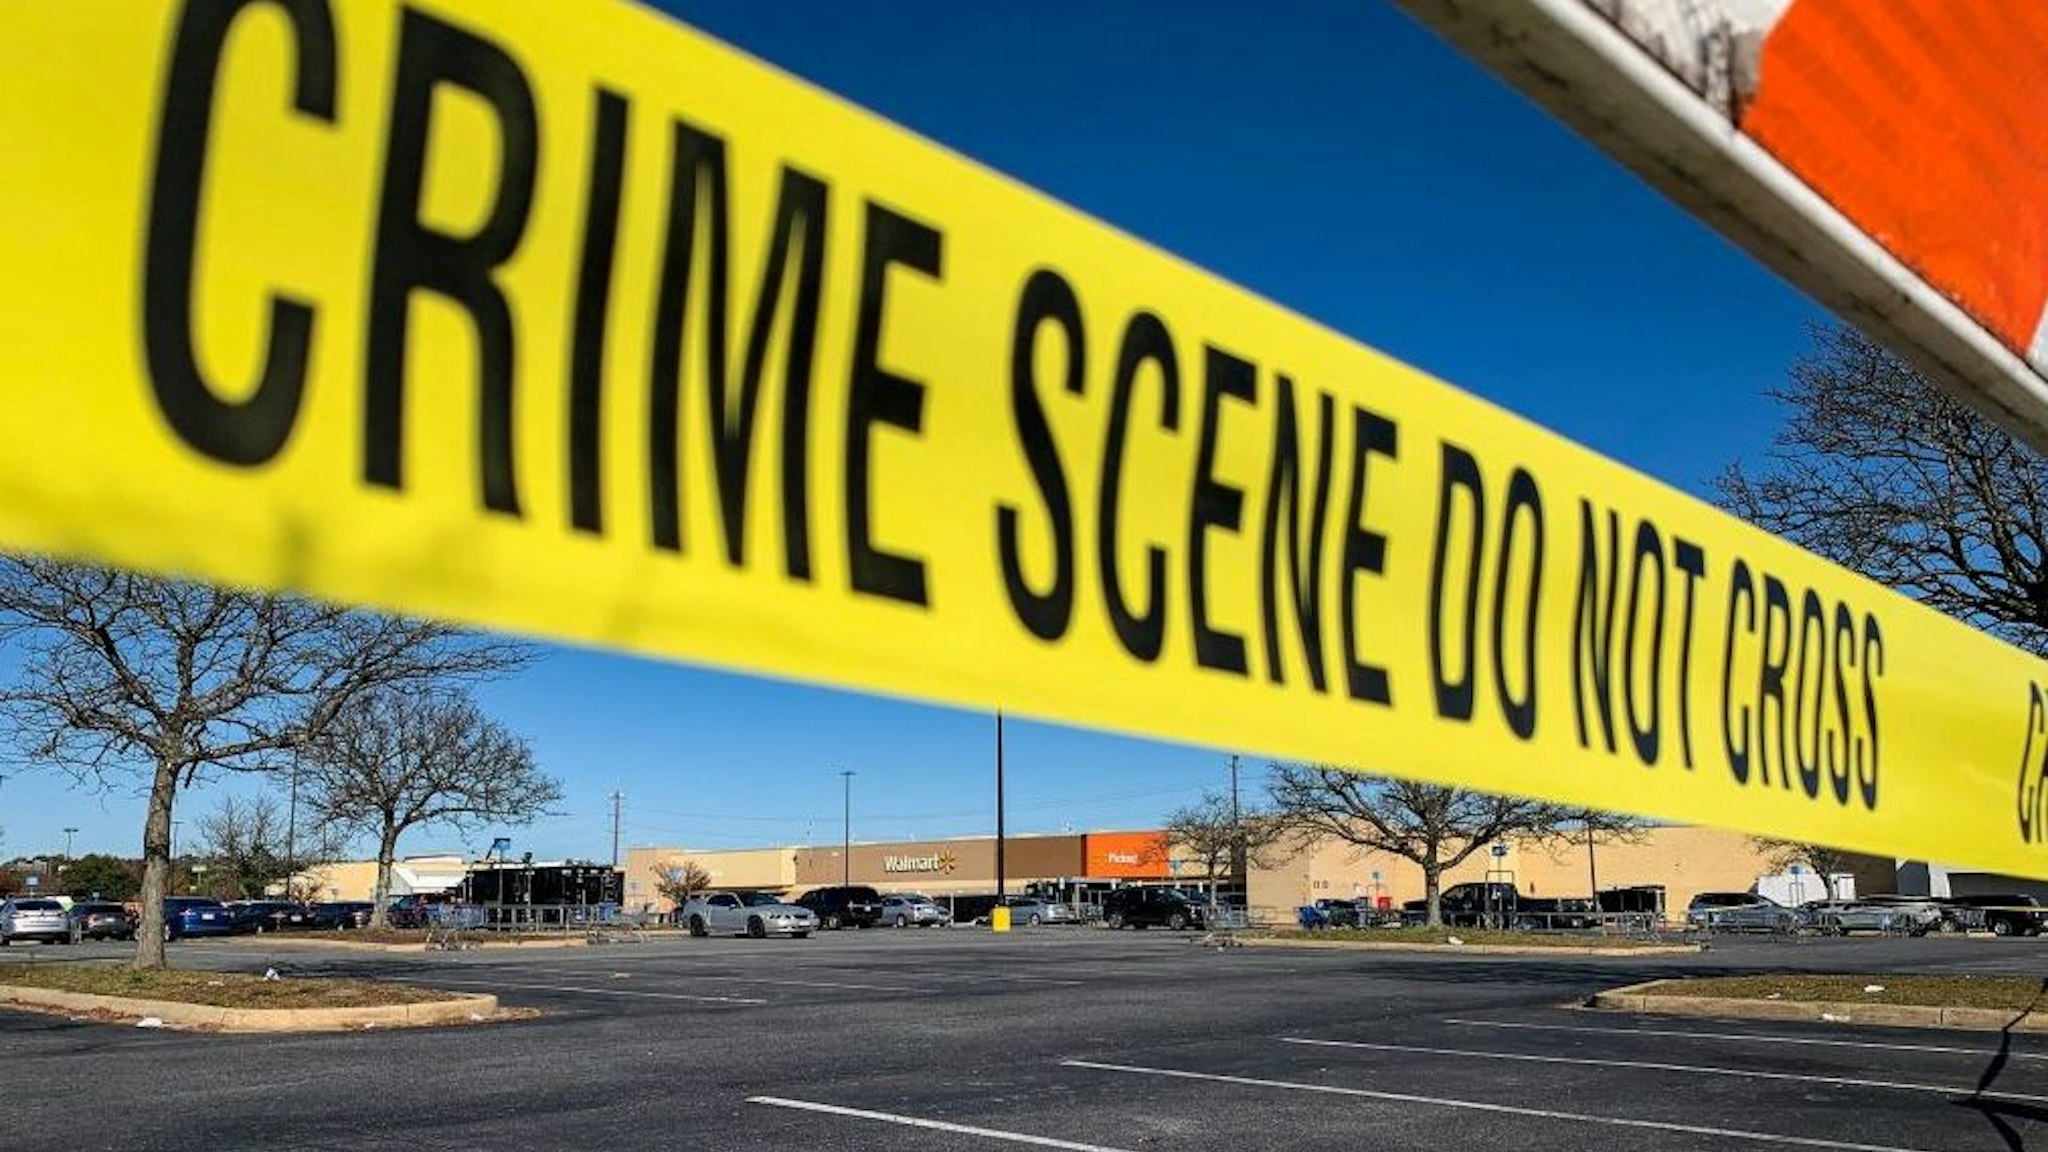 Crime scene tape blocks the parking lot outside of a Walmart following a mass shooting the night before in Chesapeake, Virginia on November 23, 2022.